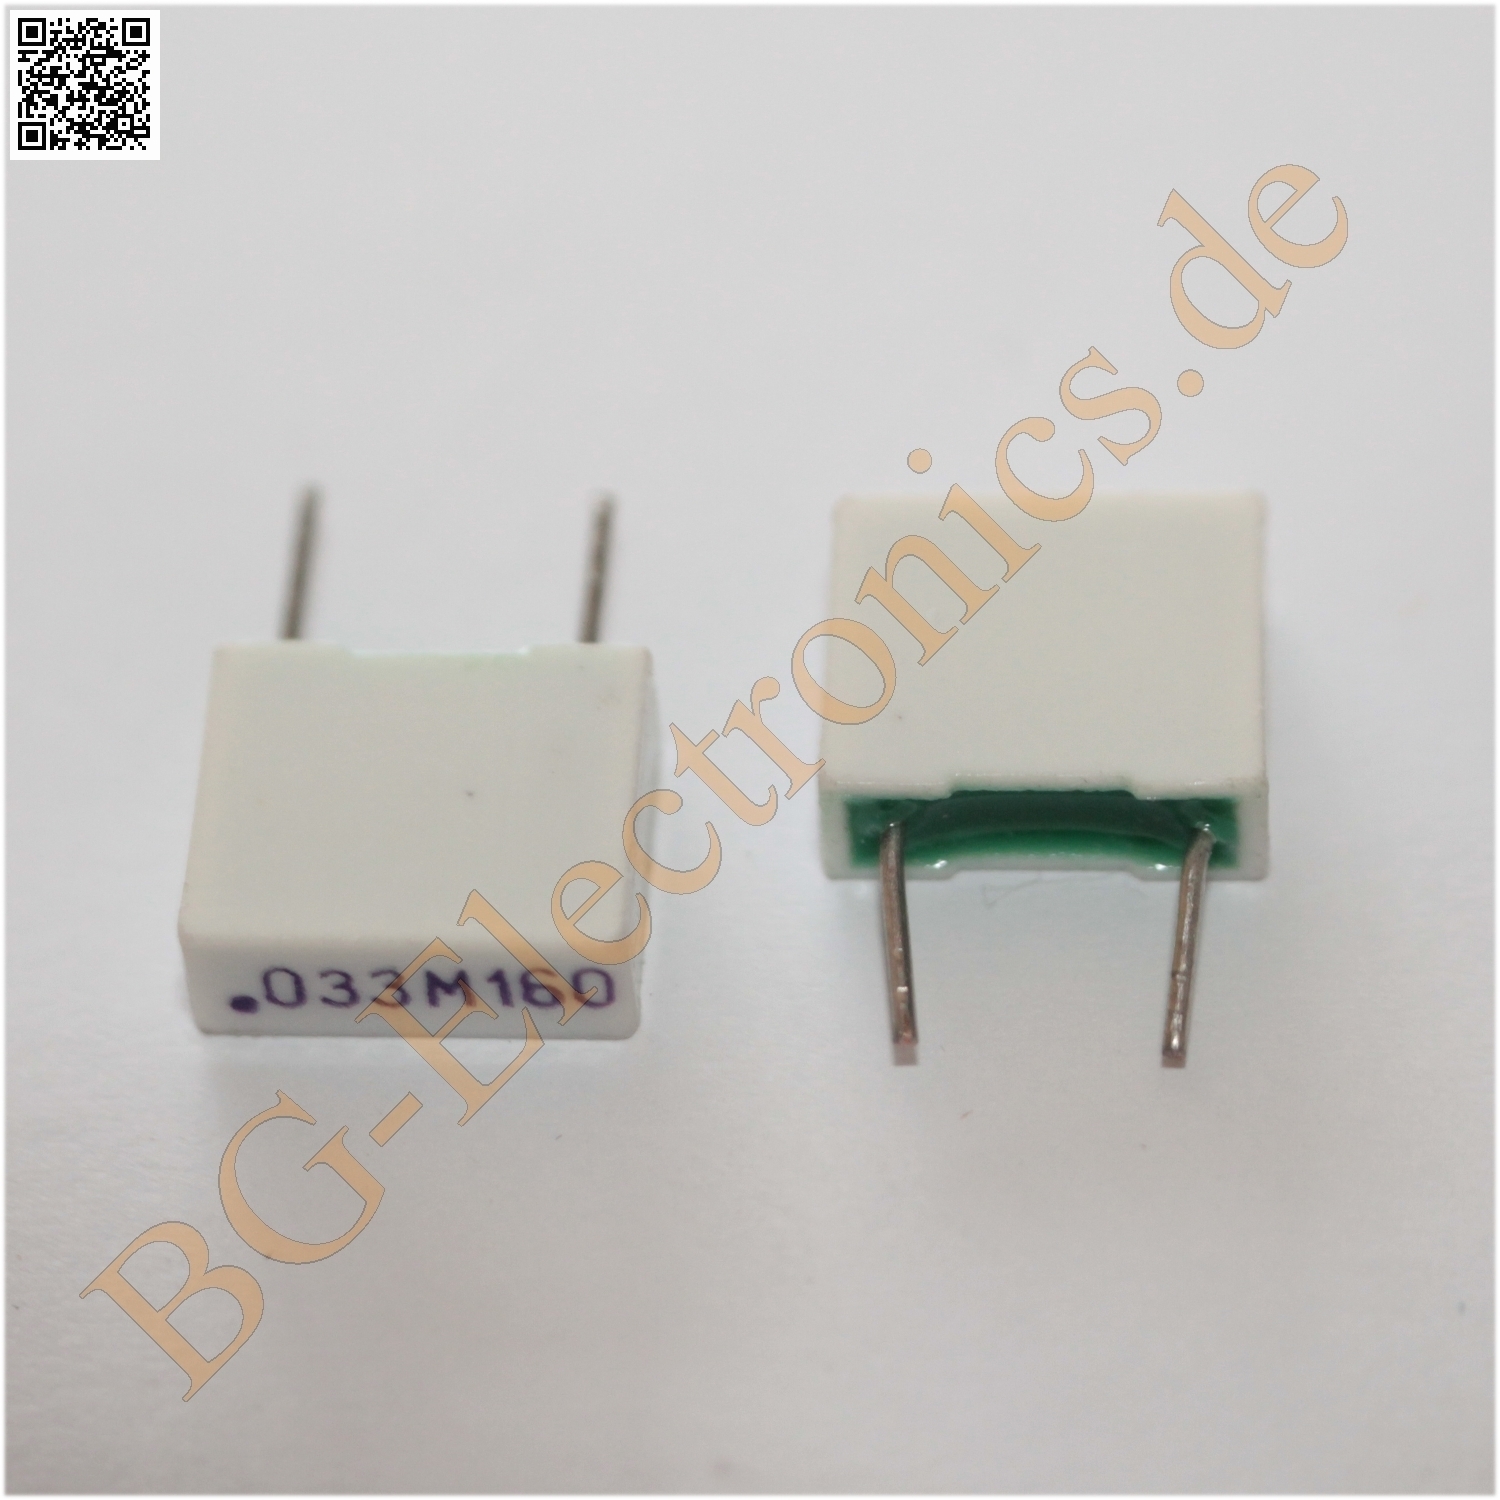 FO-R 0.033uF / 160V / RM7.5